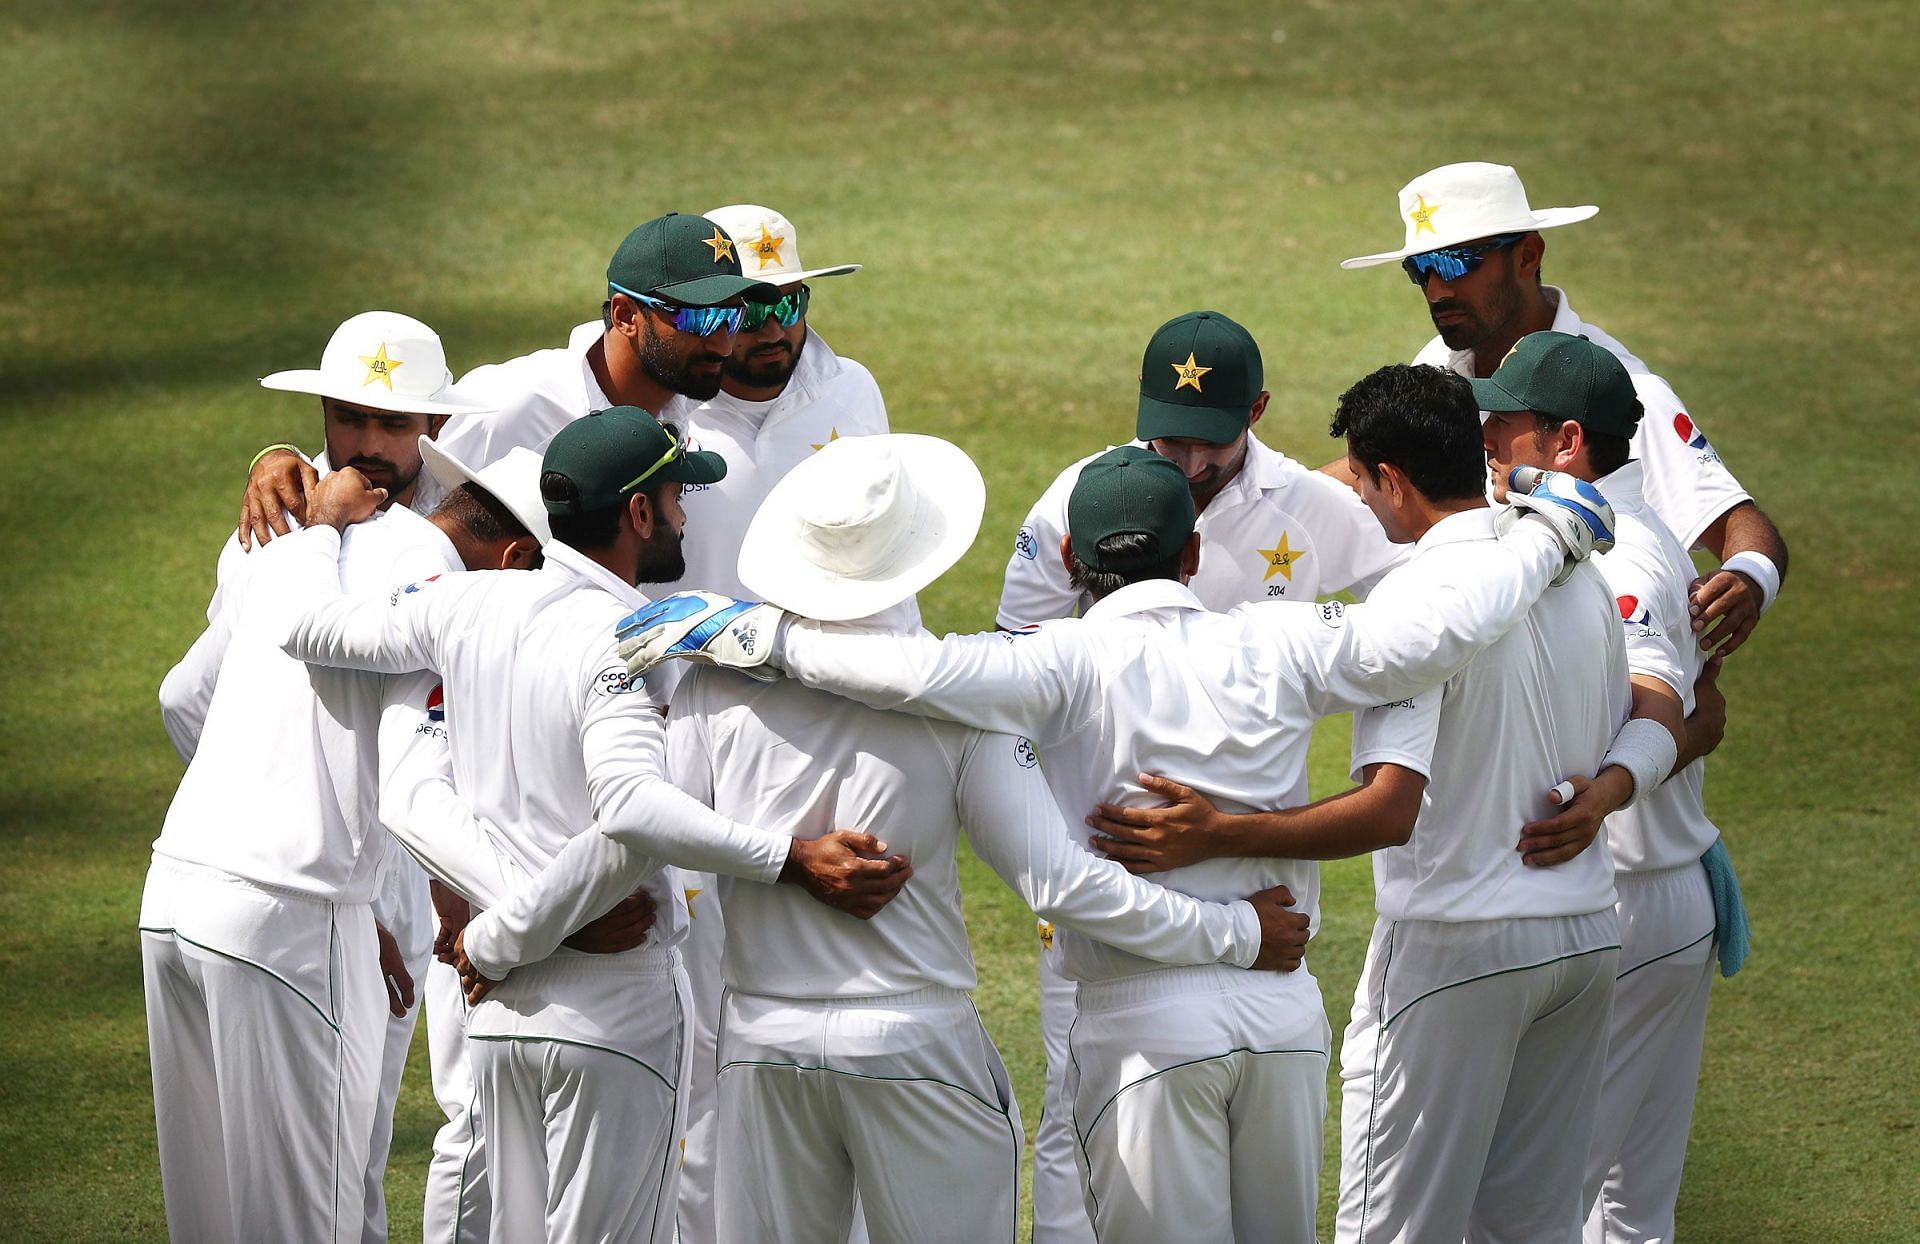 Babar Azam will lead an 18-man squad in Sri Lanka next month (Image courtesy: Getty Images)